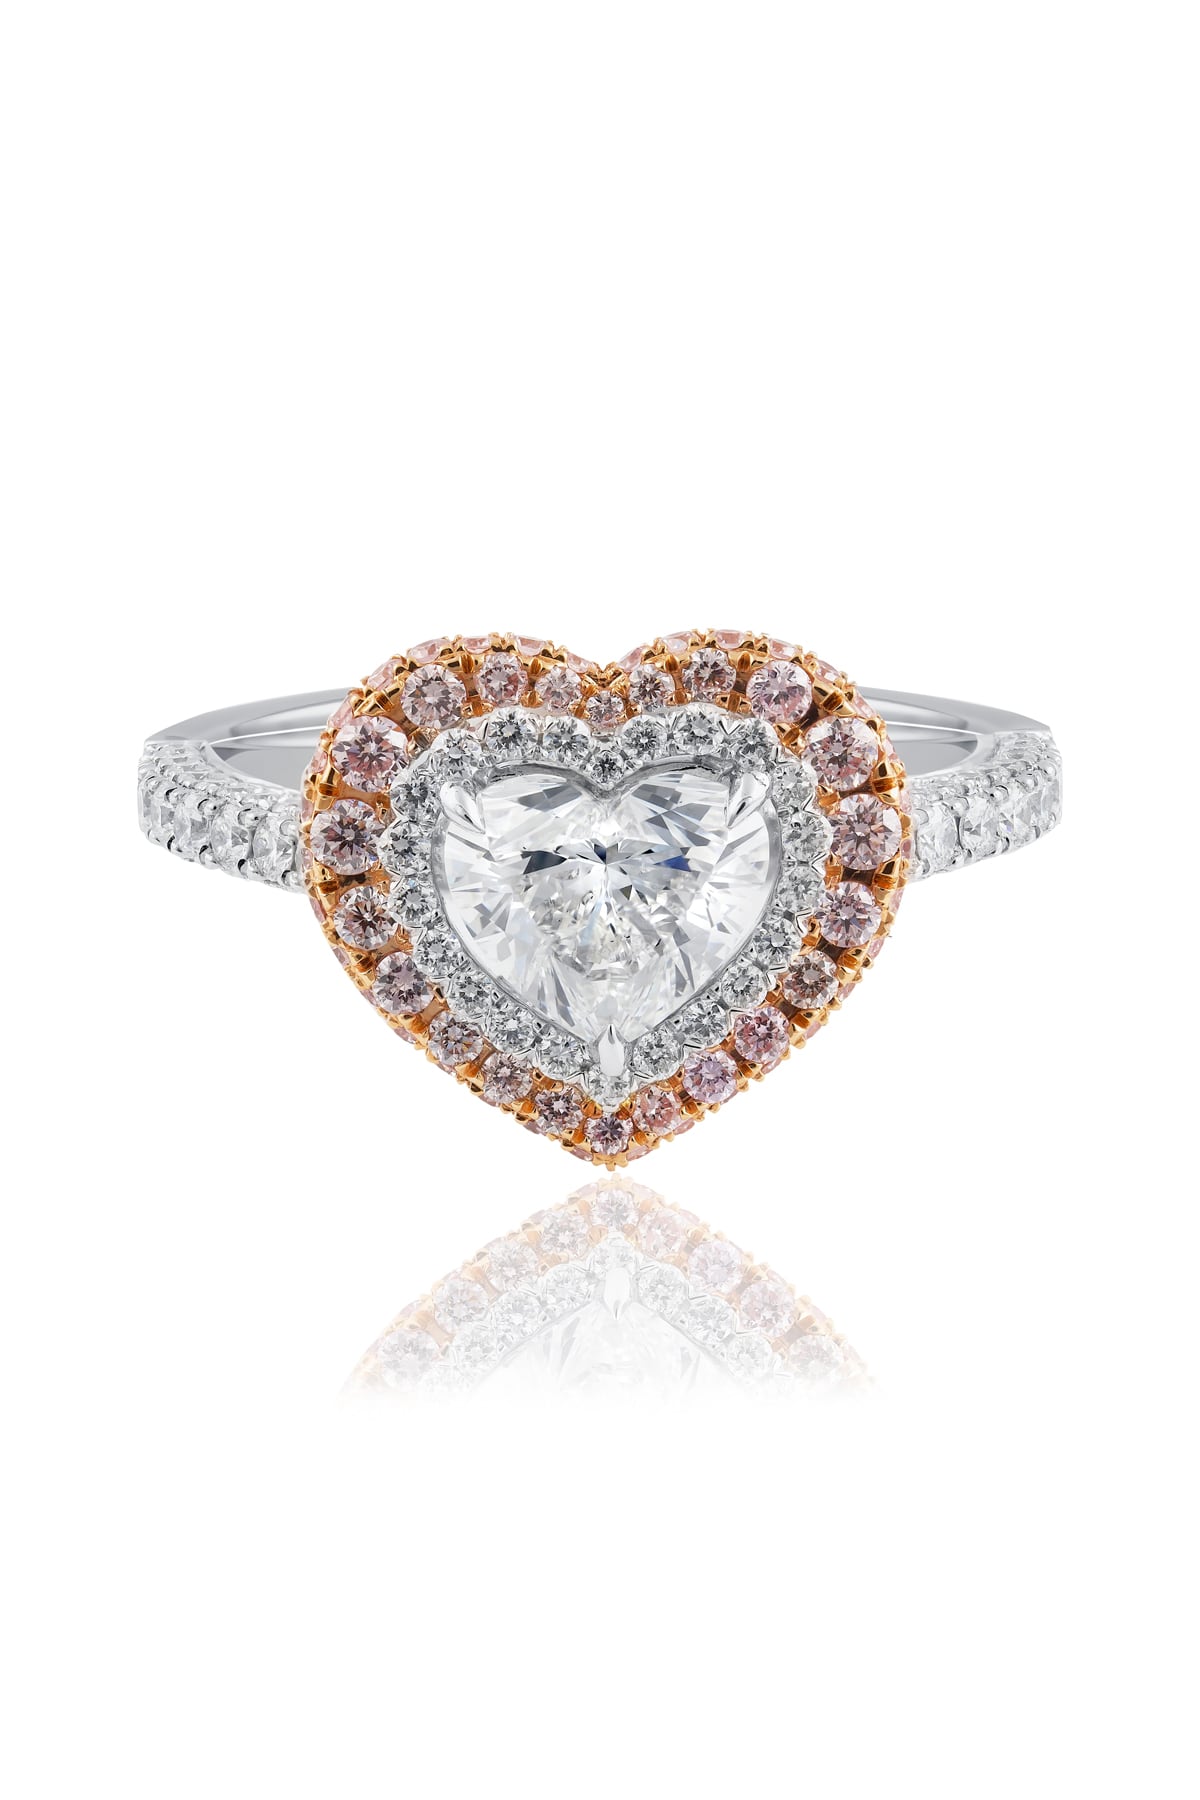 Heart Shaped Diamond Halo Ring With White And Pink Diamonds from LeGassick.